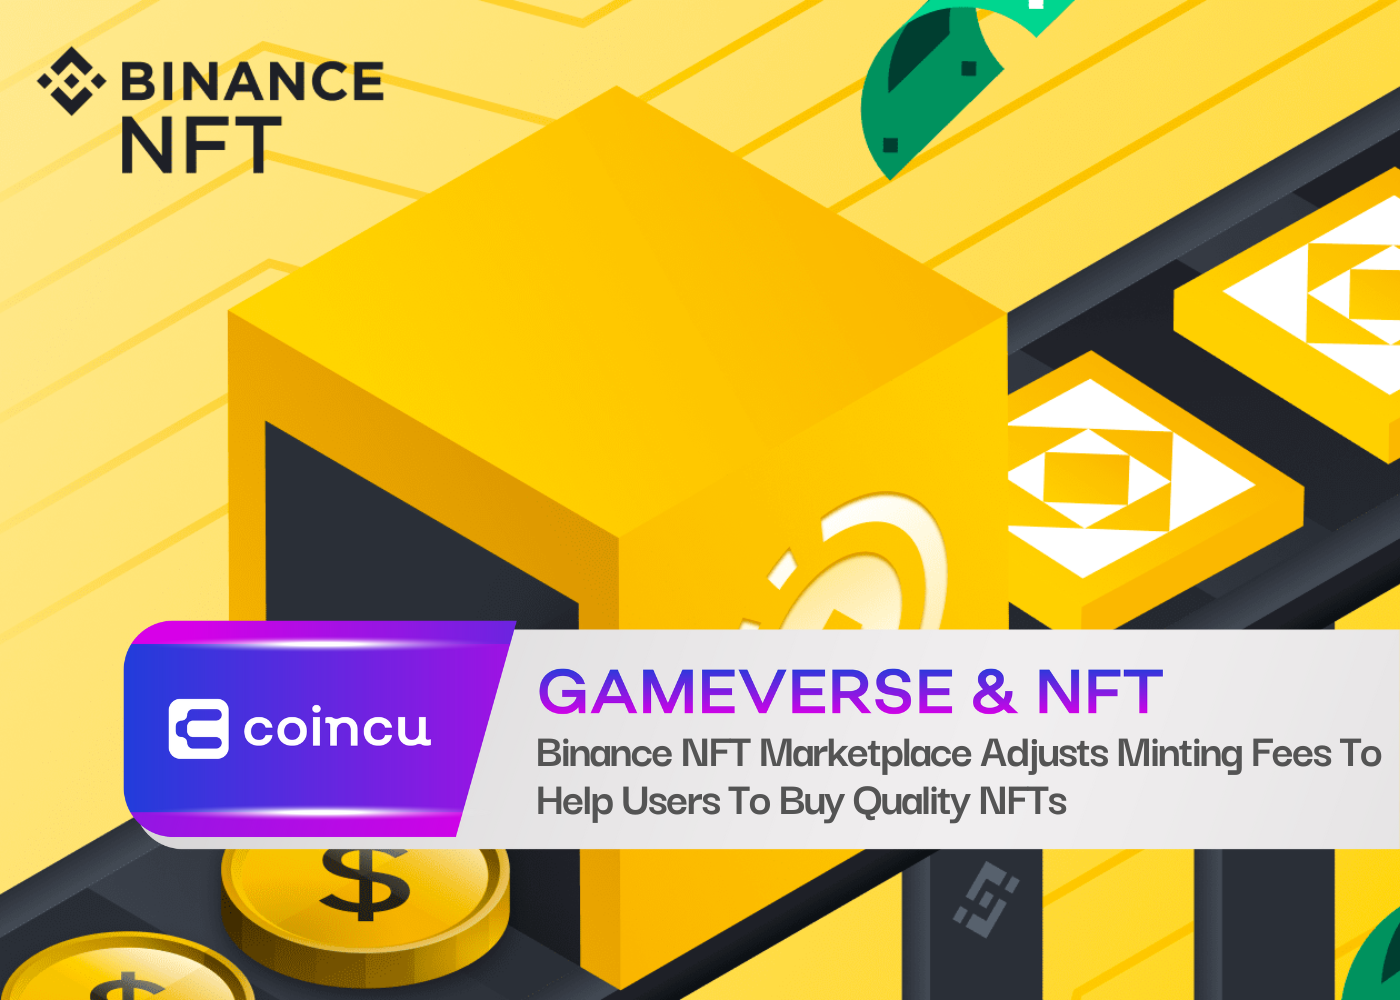 Binance NFT Marketplace Adjusts Minting Fees To Help Users To Buy Quality NFTs